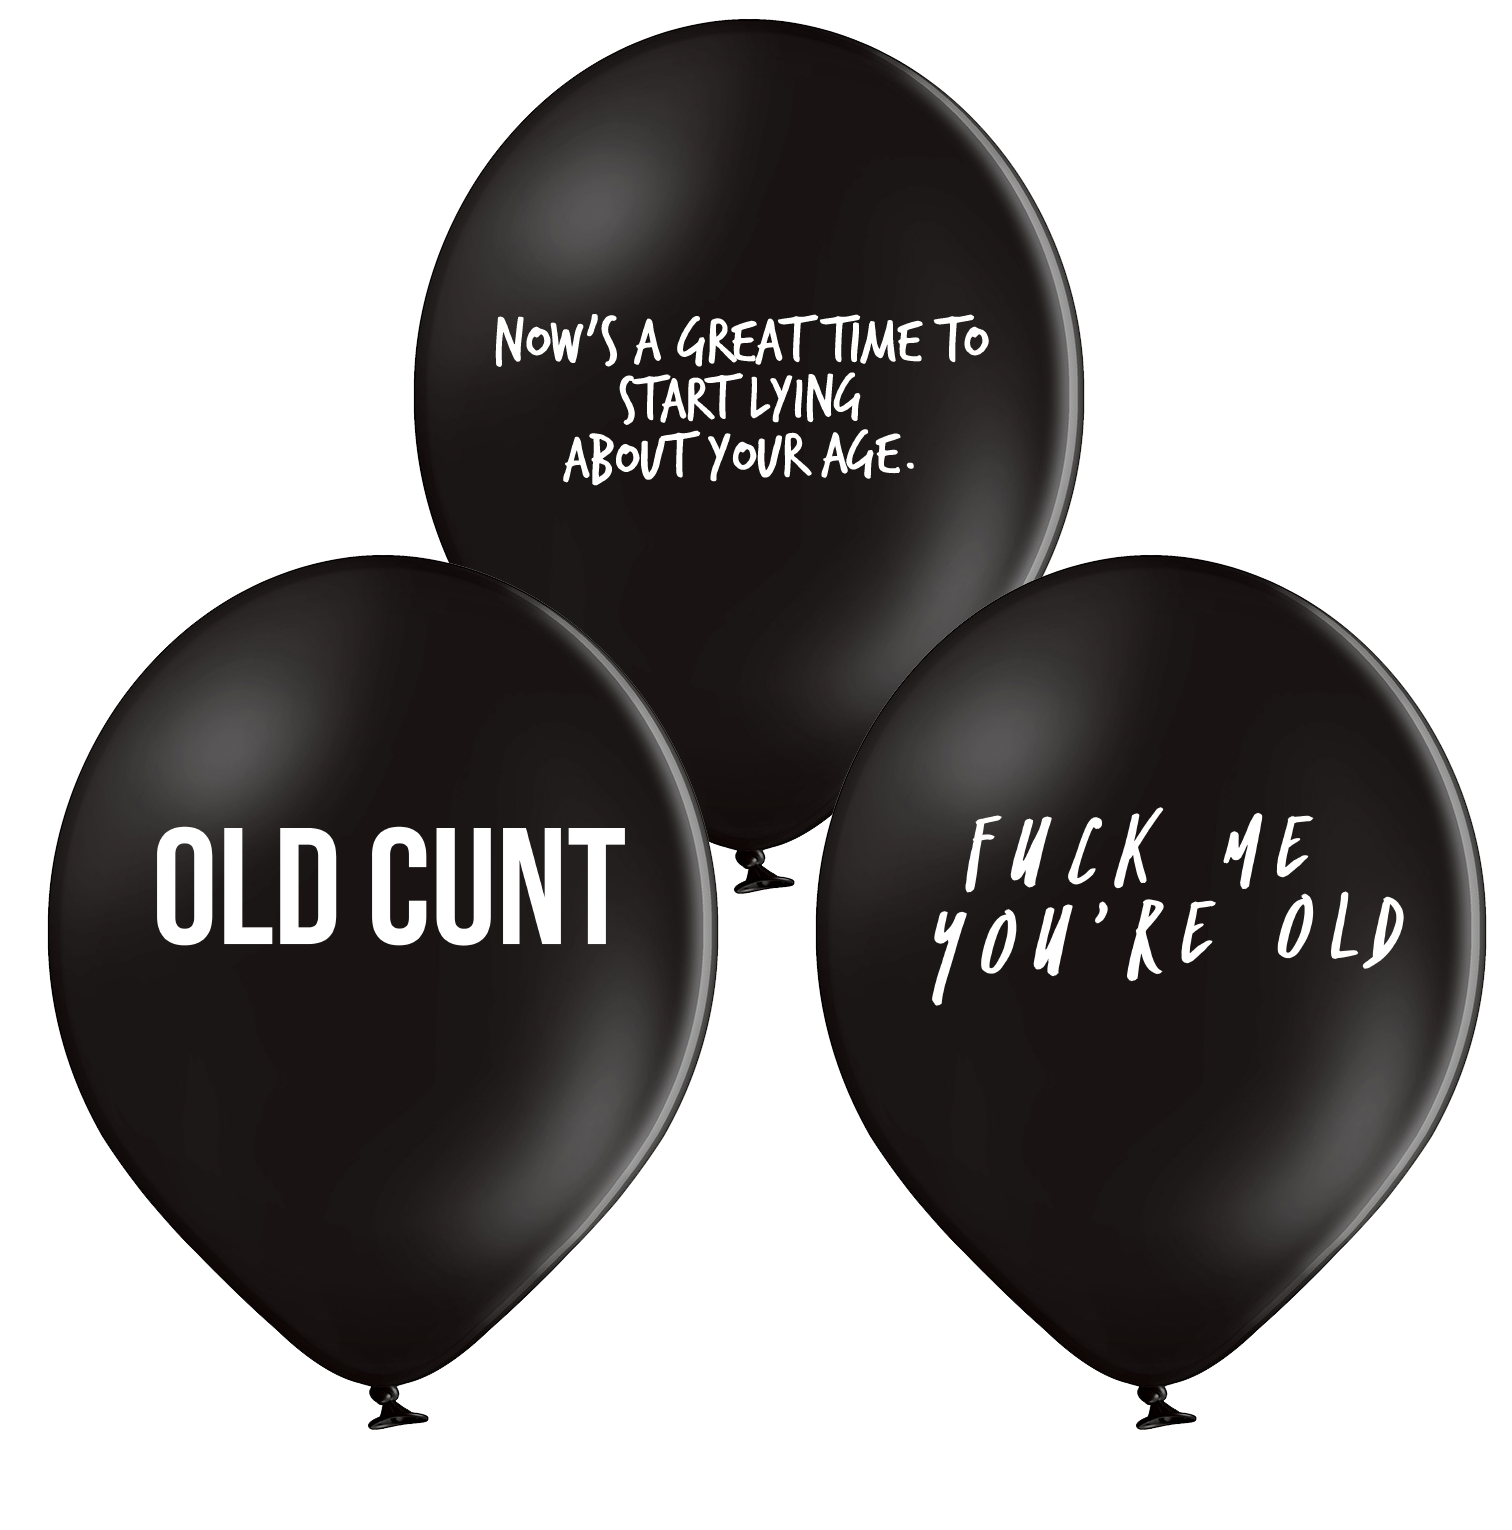 'Fuck Me You Old Cunt' Offensive Balloon Set